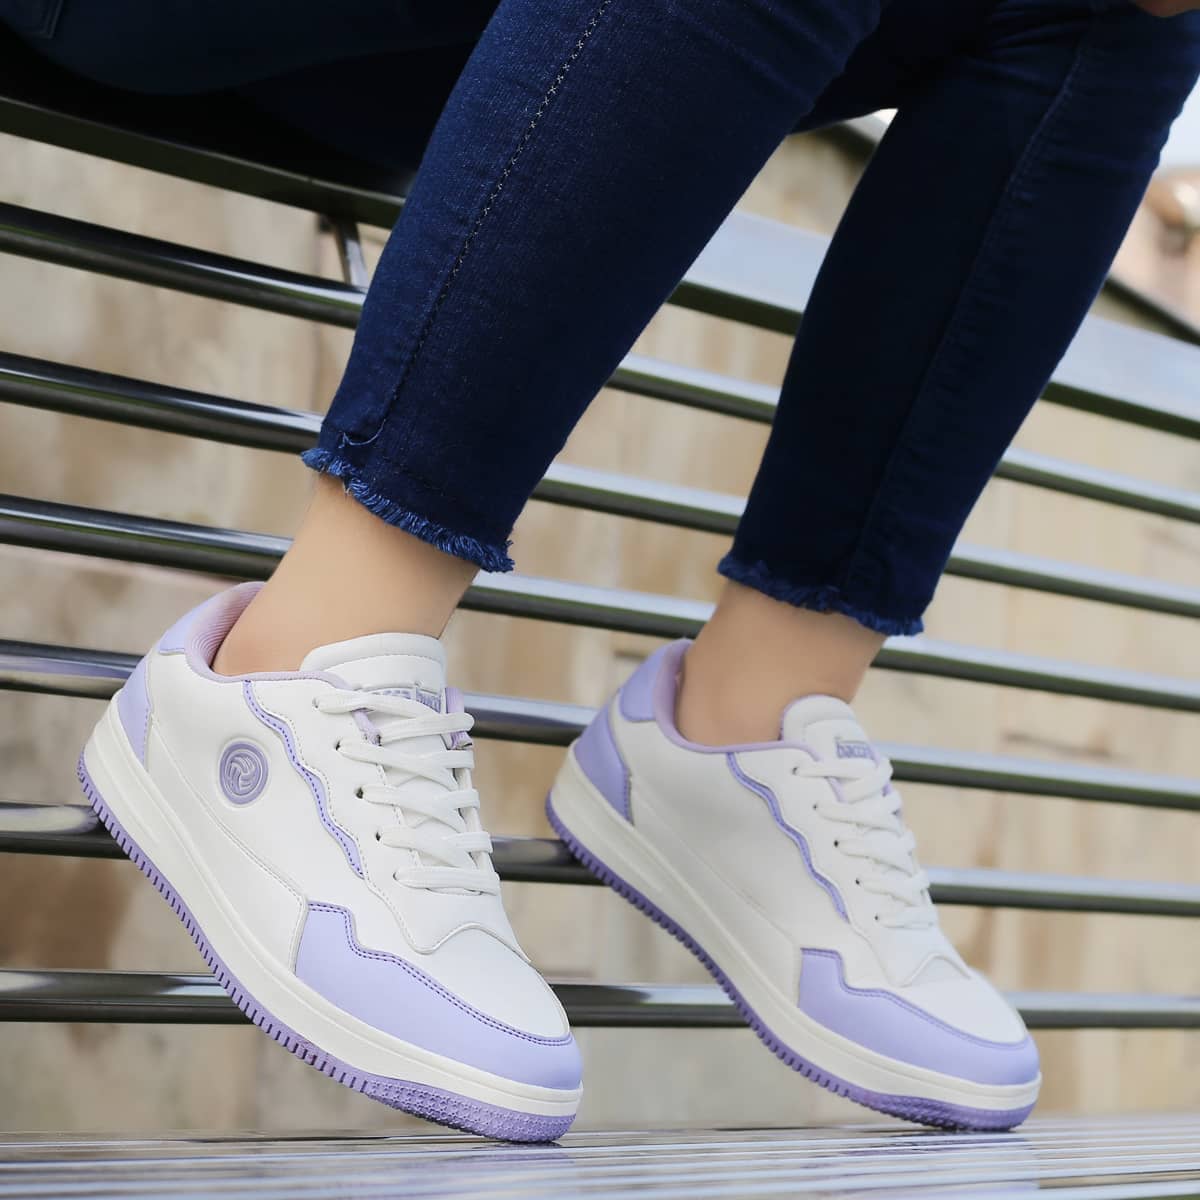 These On-Sale Sneakers Are the Best for Flat Feet